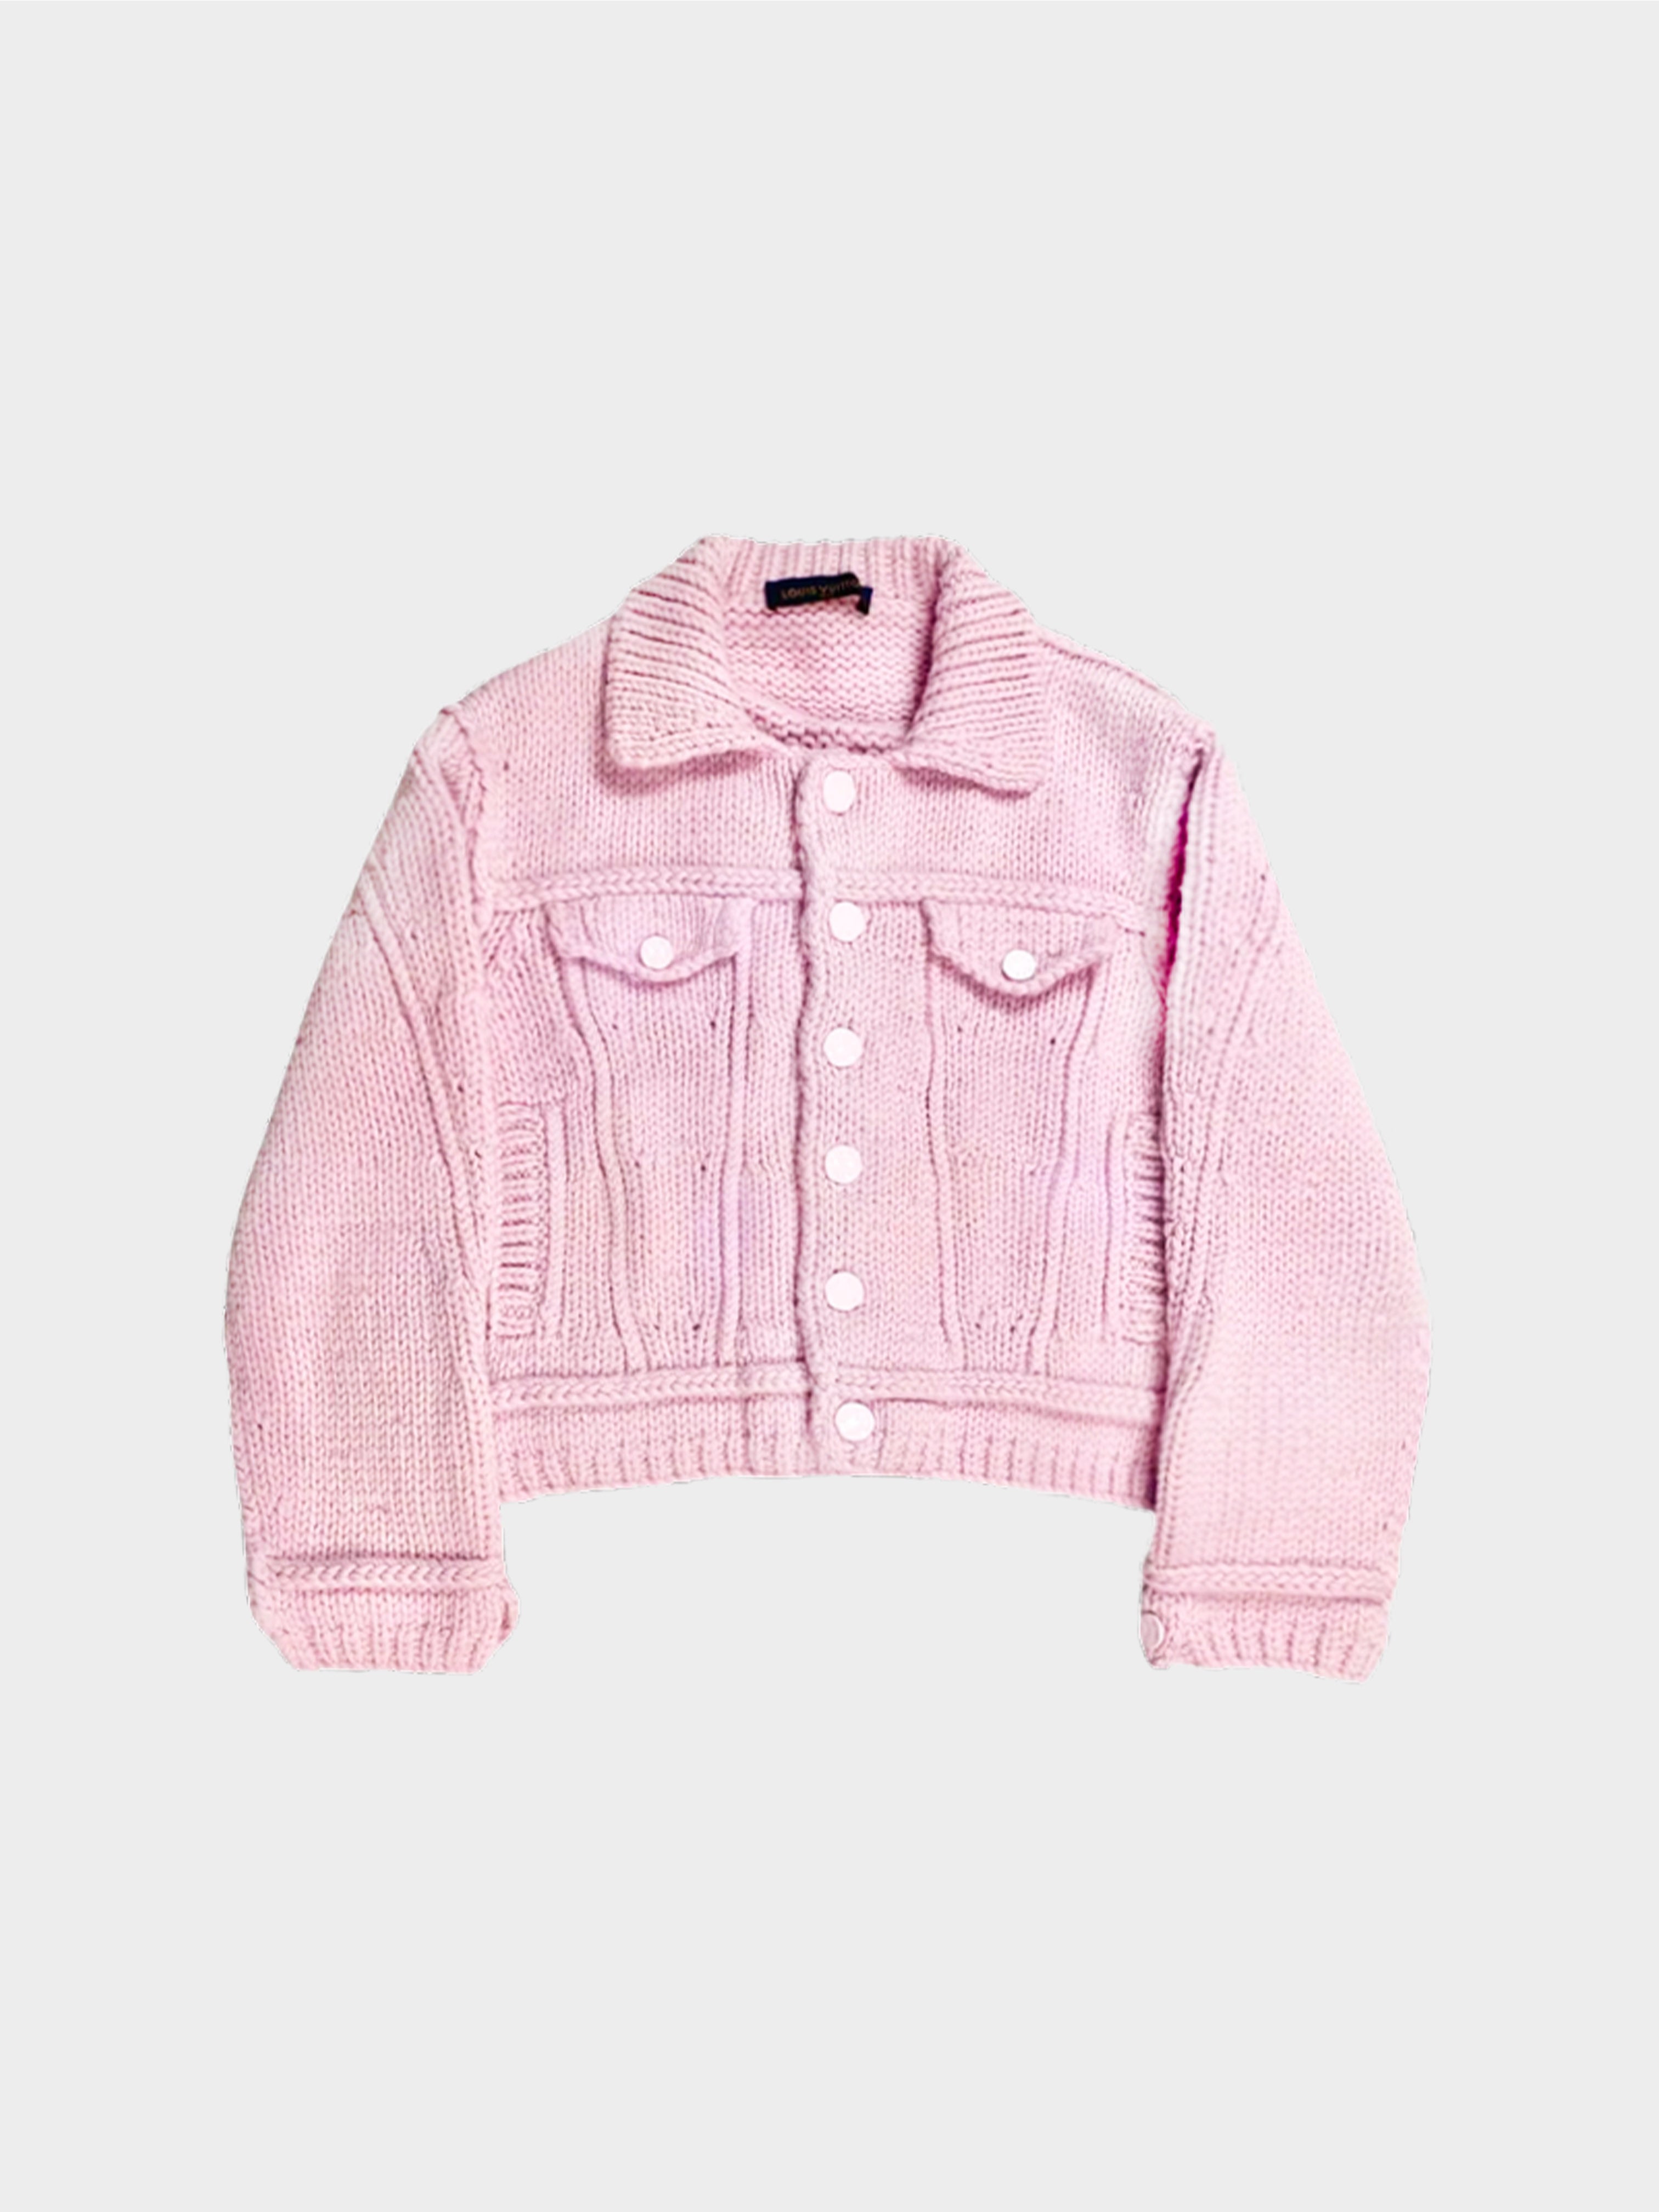 Louis Vuitton SS 2020 Rare Pink Asia Exclusive Knit Trucker Jacket